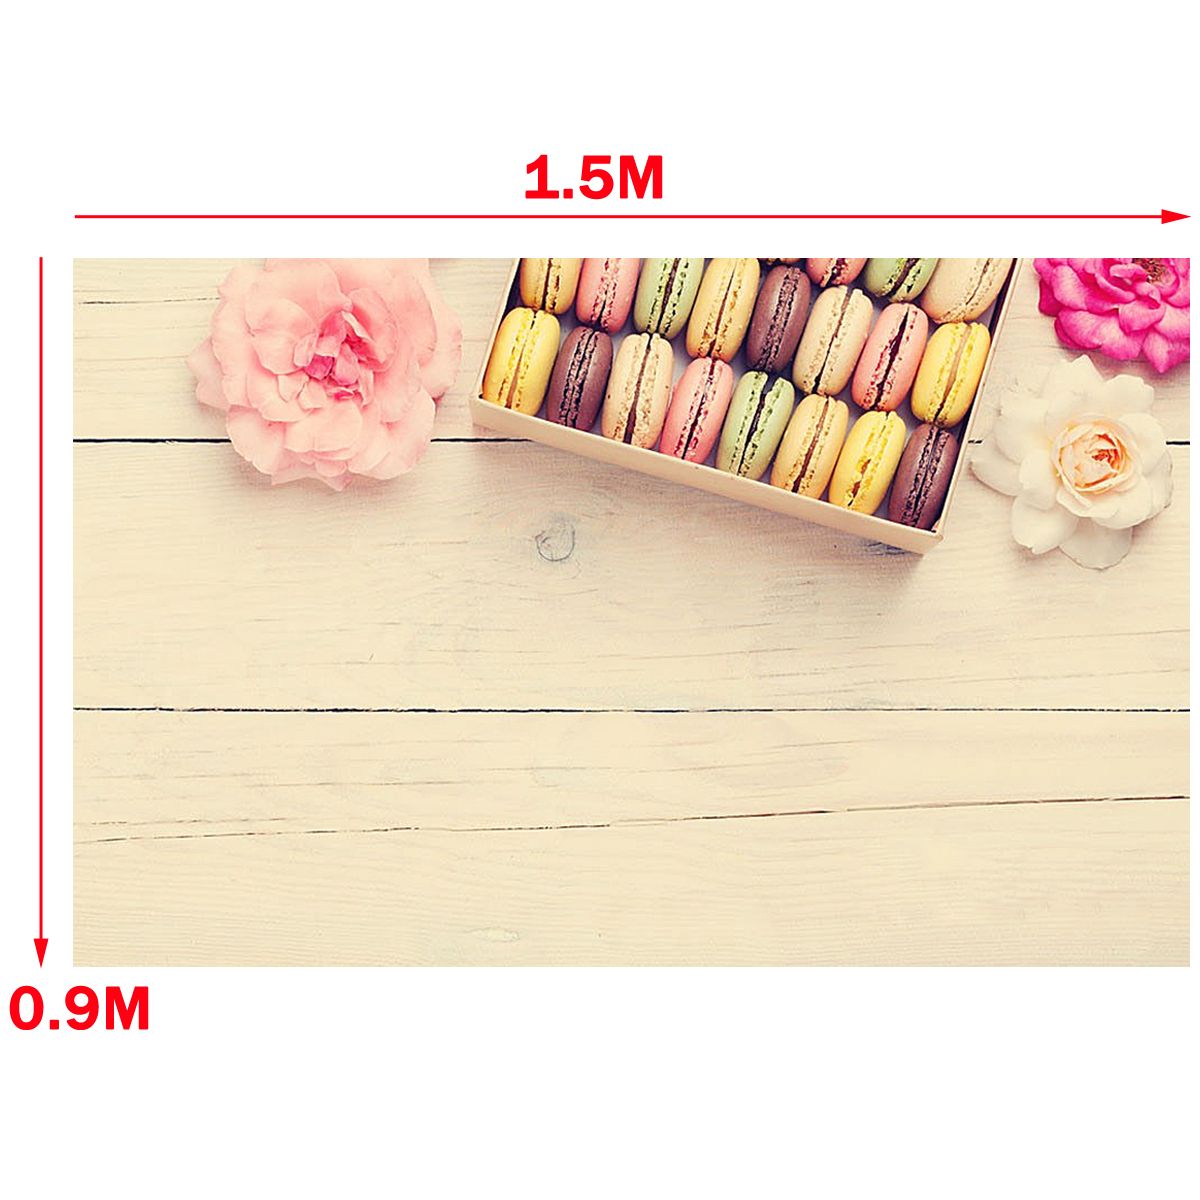 5x3FT-Macaron-Flowers-Wooden-Wall-Photography-Backdrop-Studio-Prop-Background-1401727